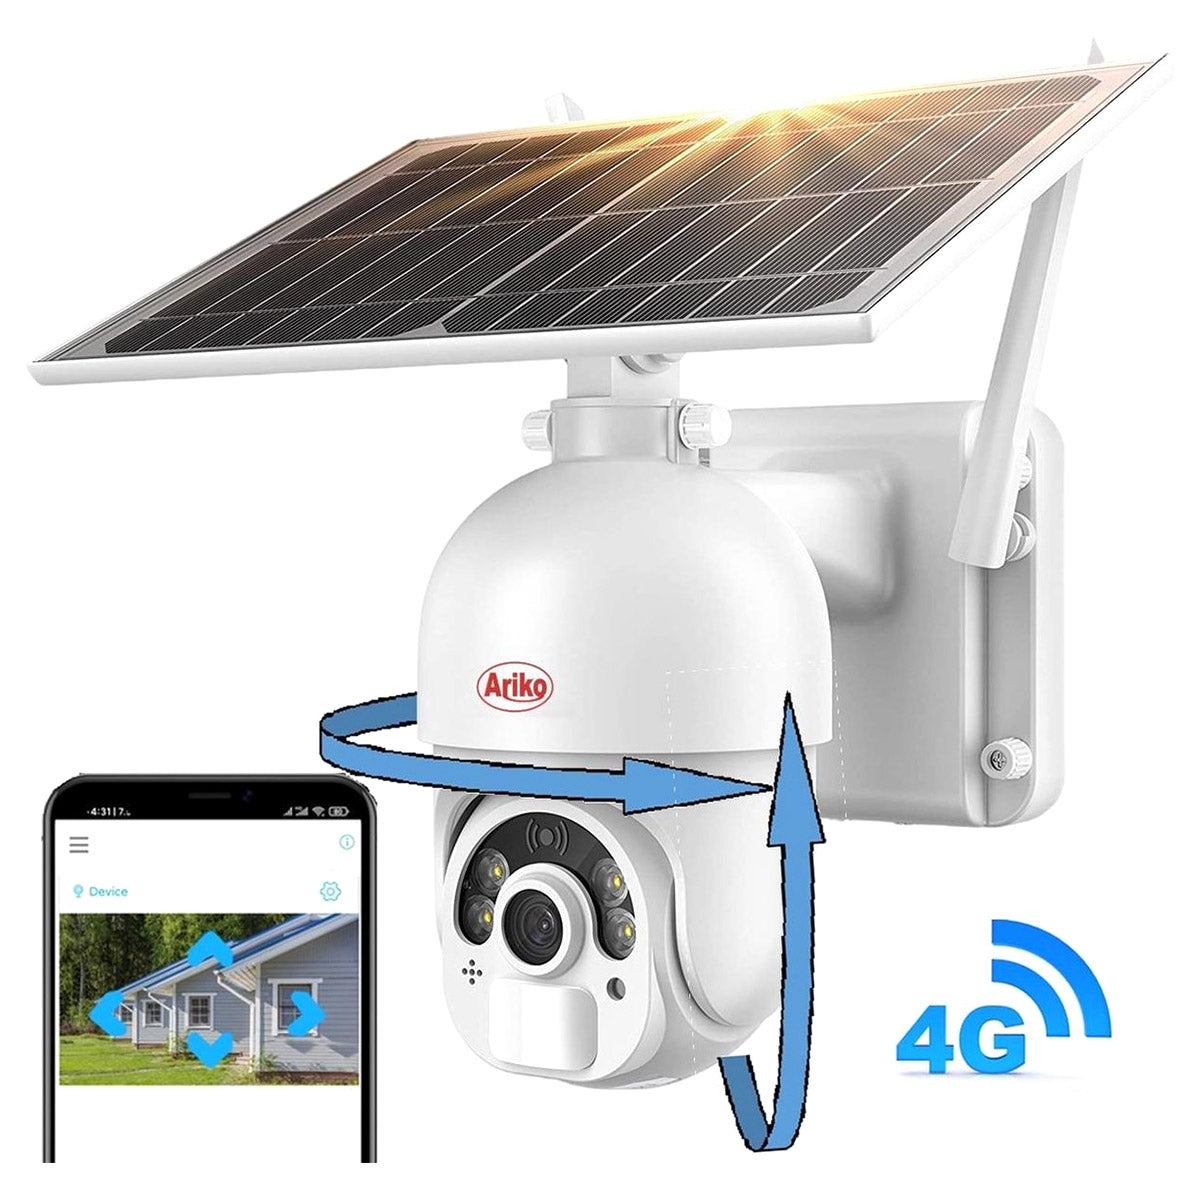 <tc>Ariko</tc> movable PTZ camera 2mp with solar panel and 4G - with audio - person follower - Dutch manual and support